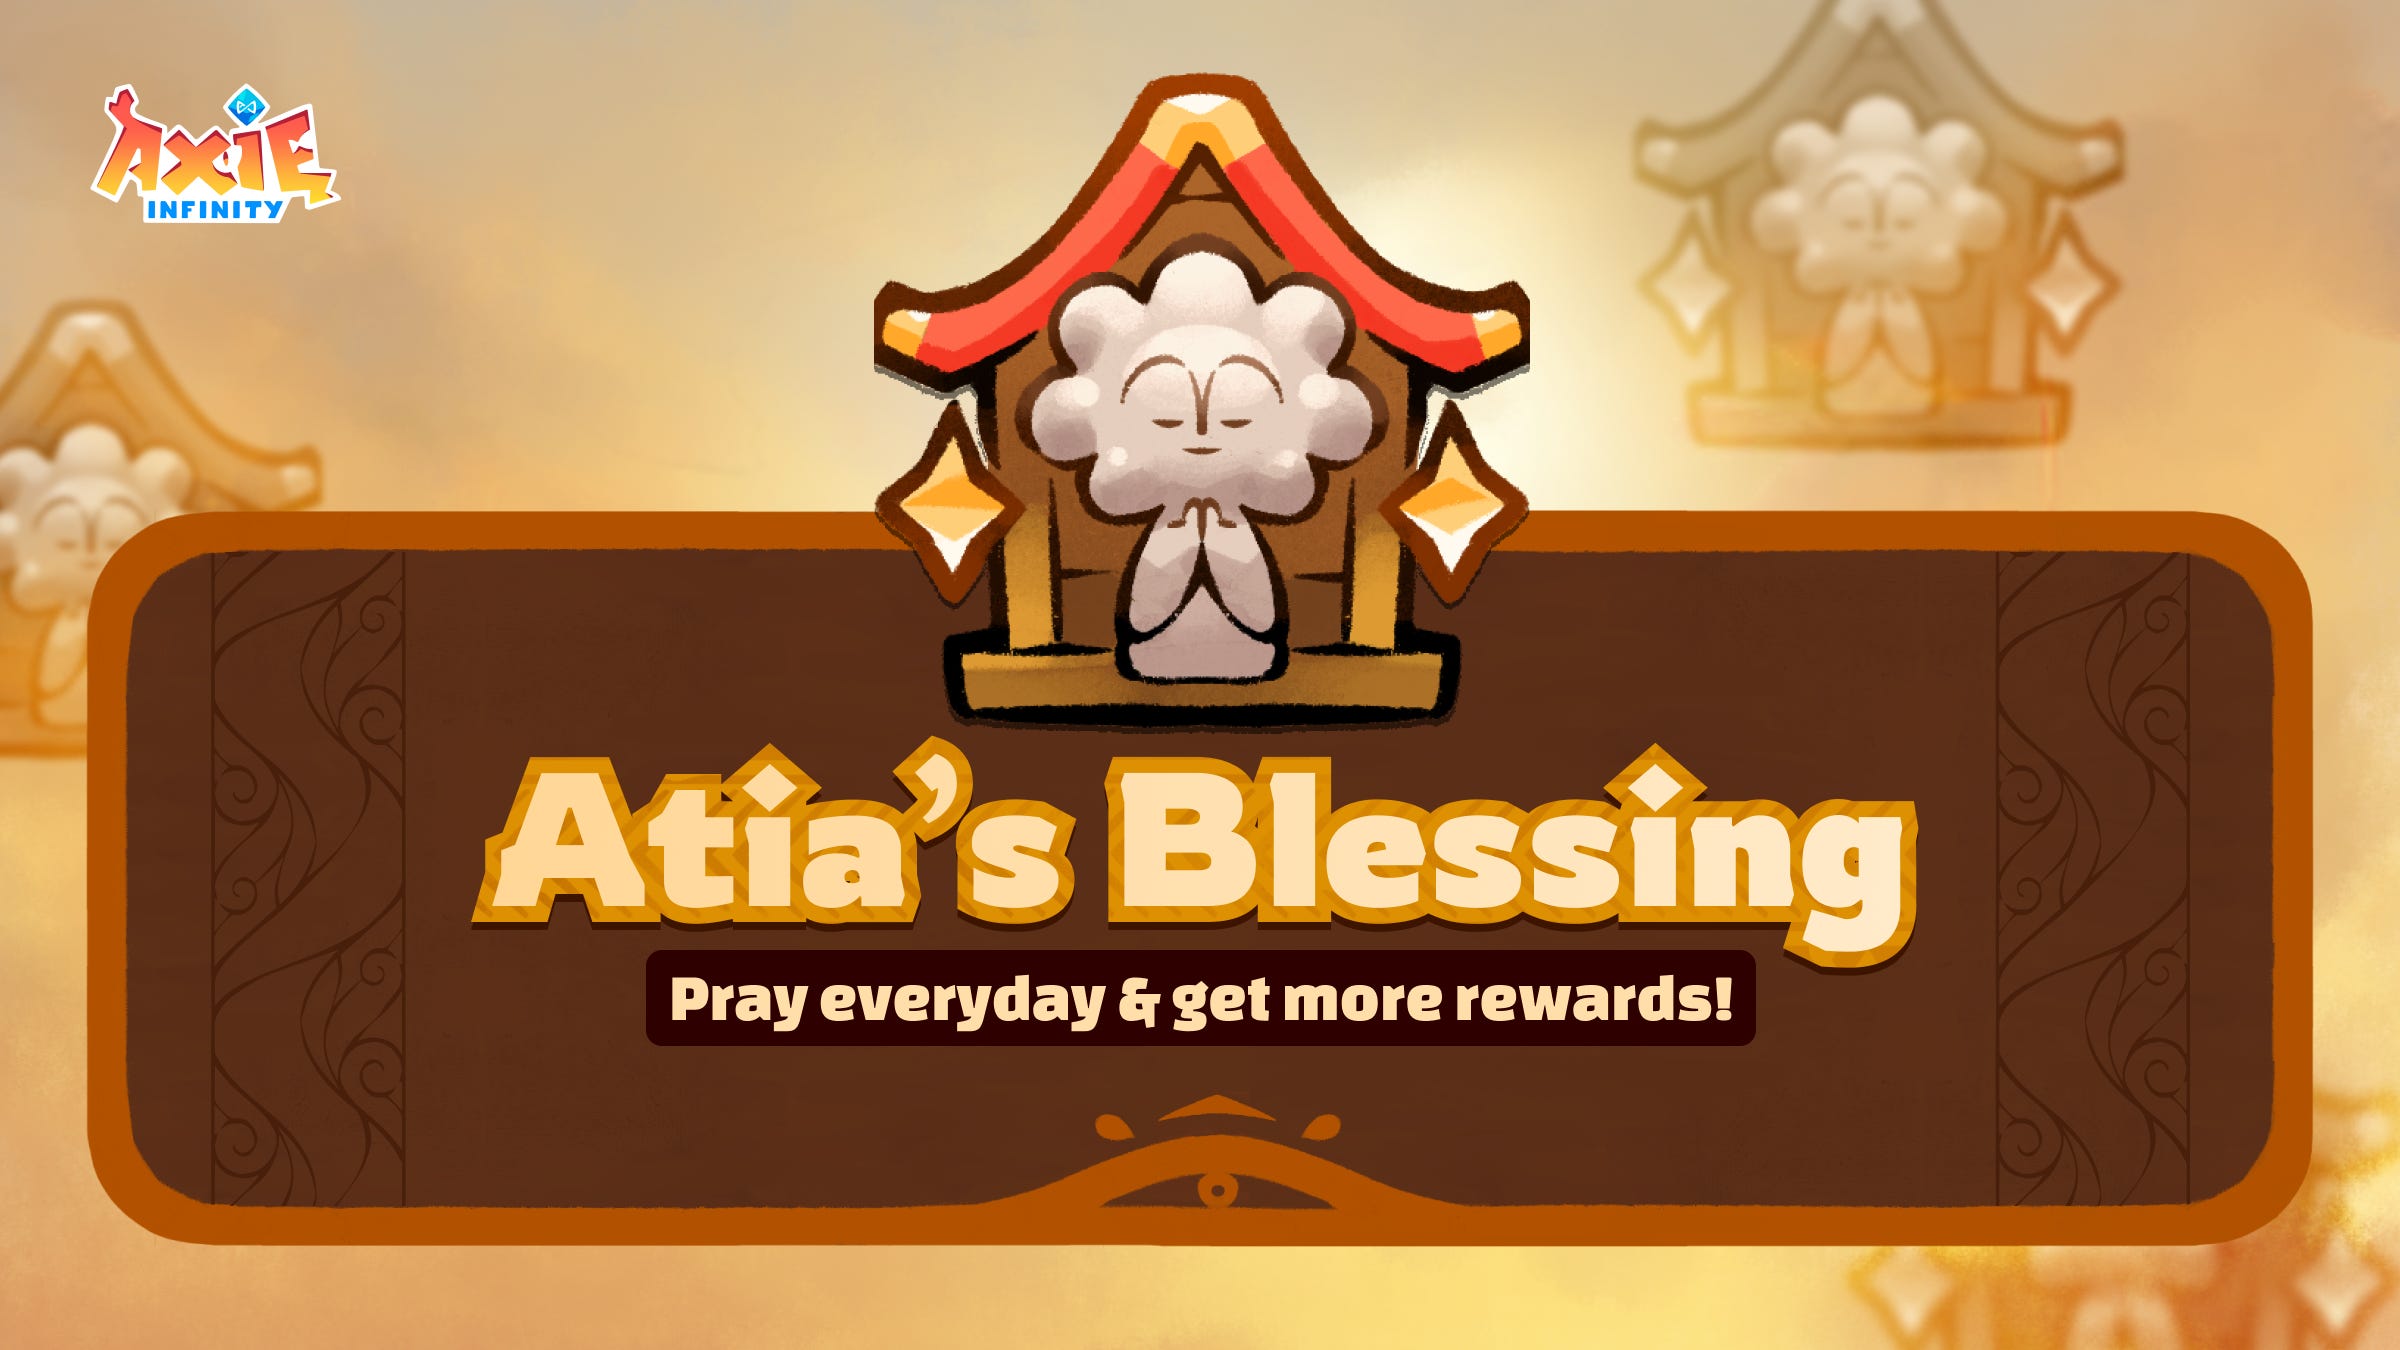 Introducing: Atia's Blessing! - by Axie Infinity